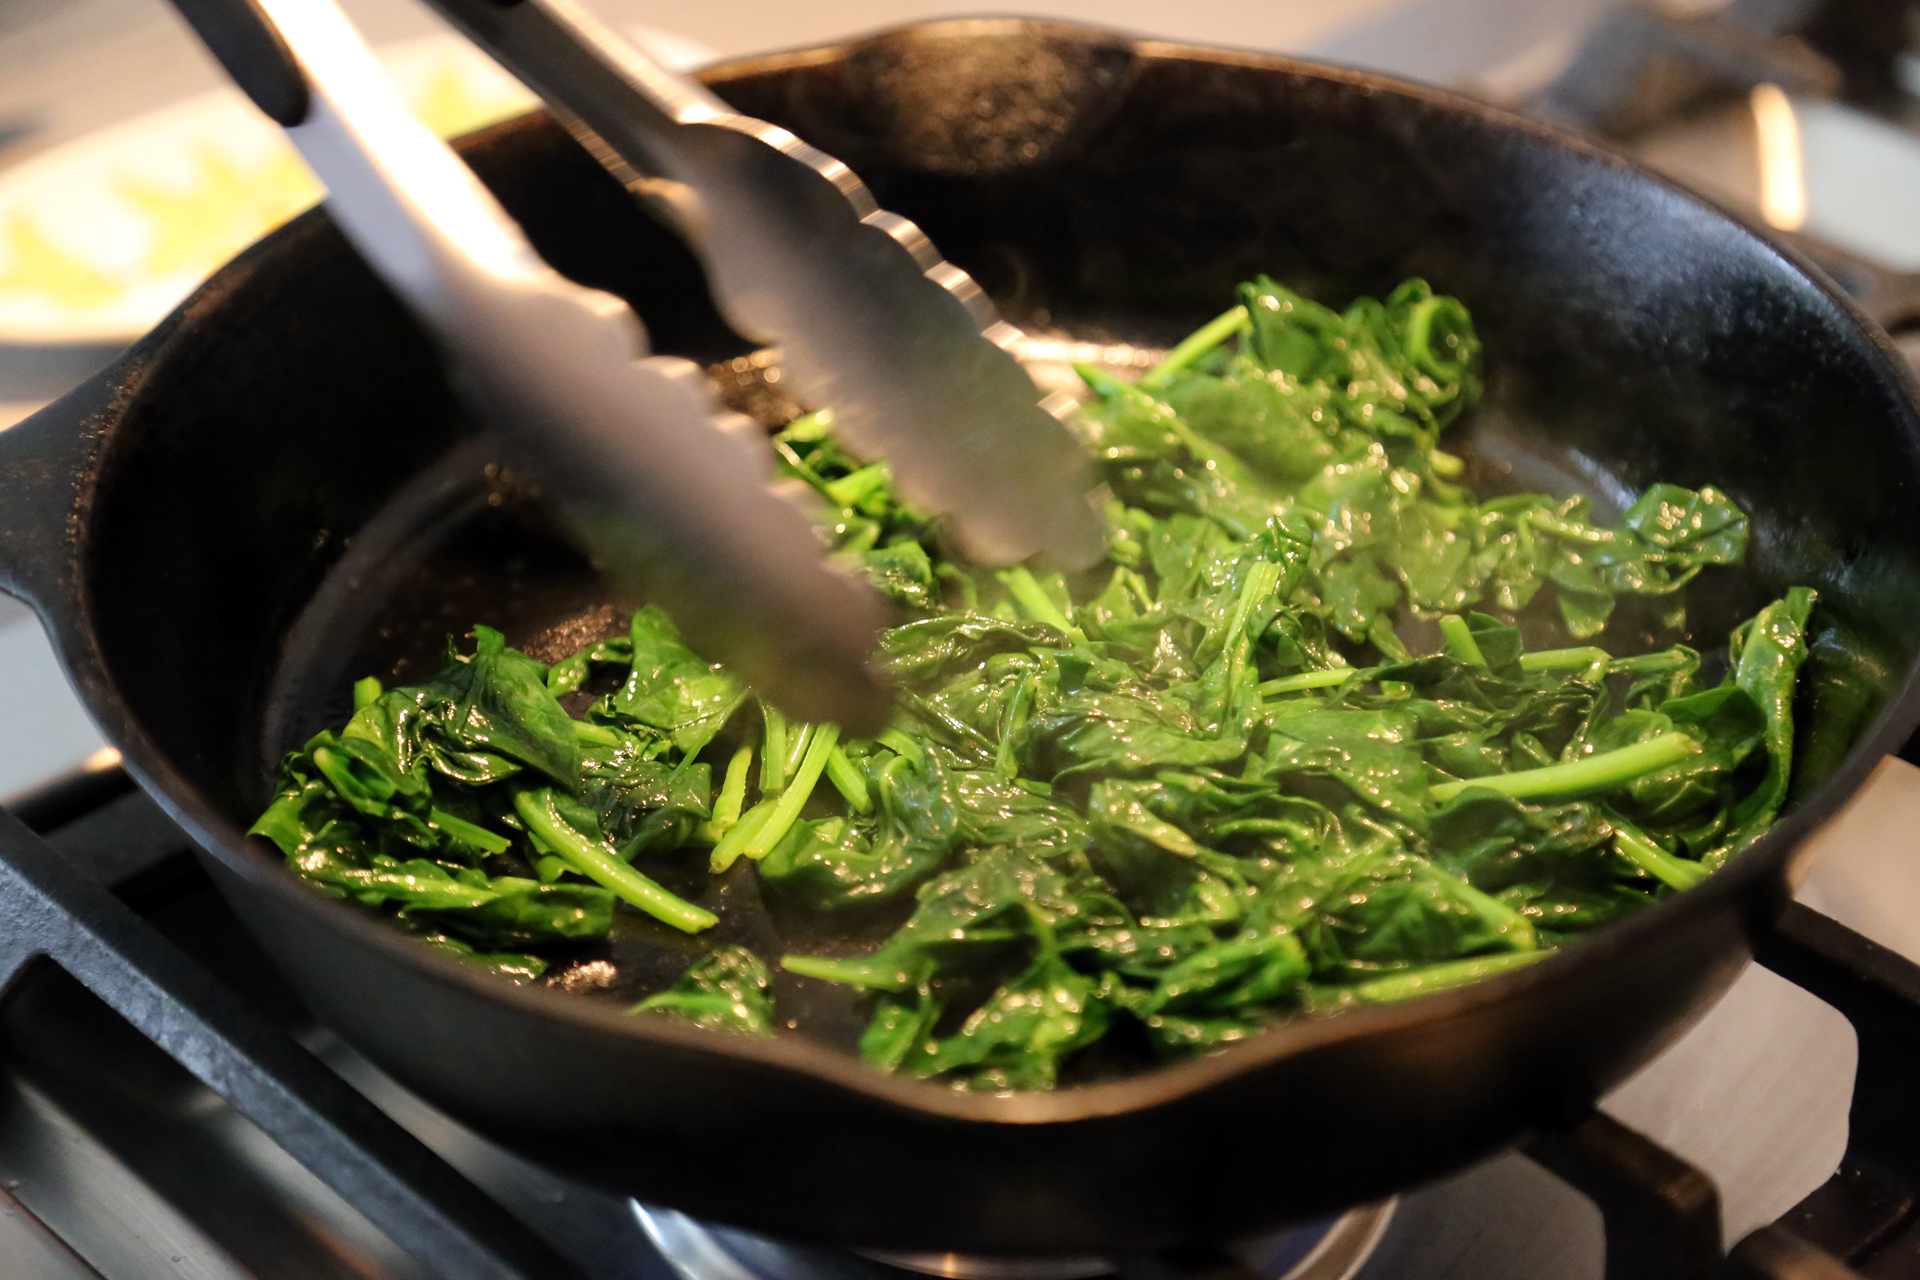 In a frying pan, melt 1/2 tbsp butter. Add the spinach and cook until wilted and dry, about 2 minutes.